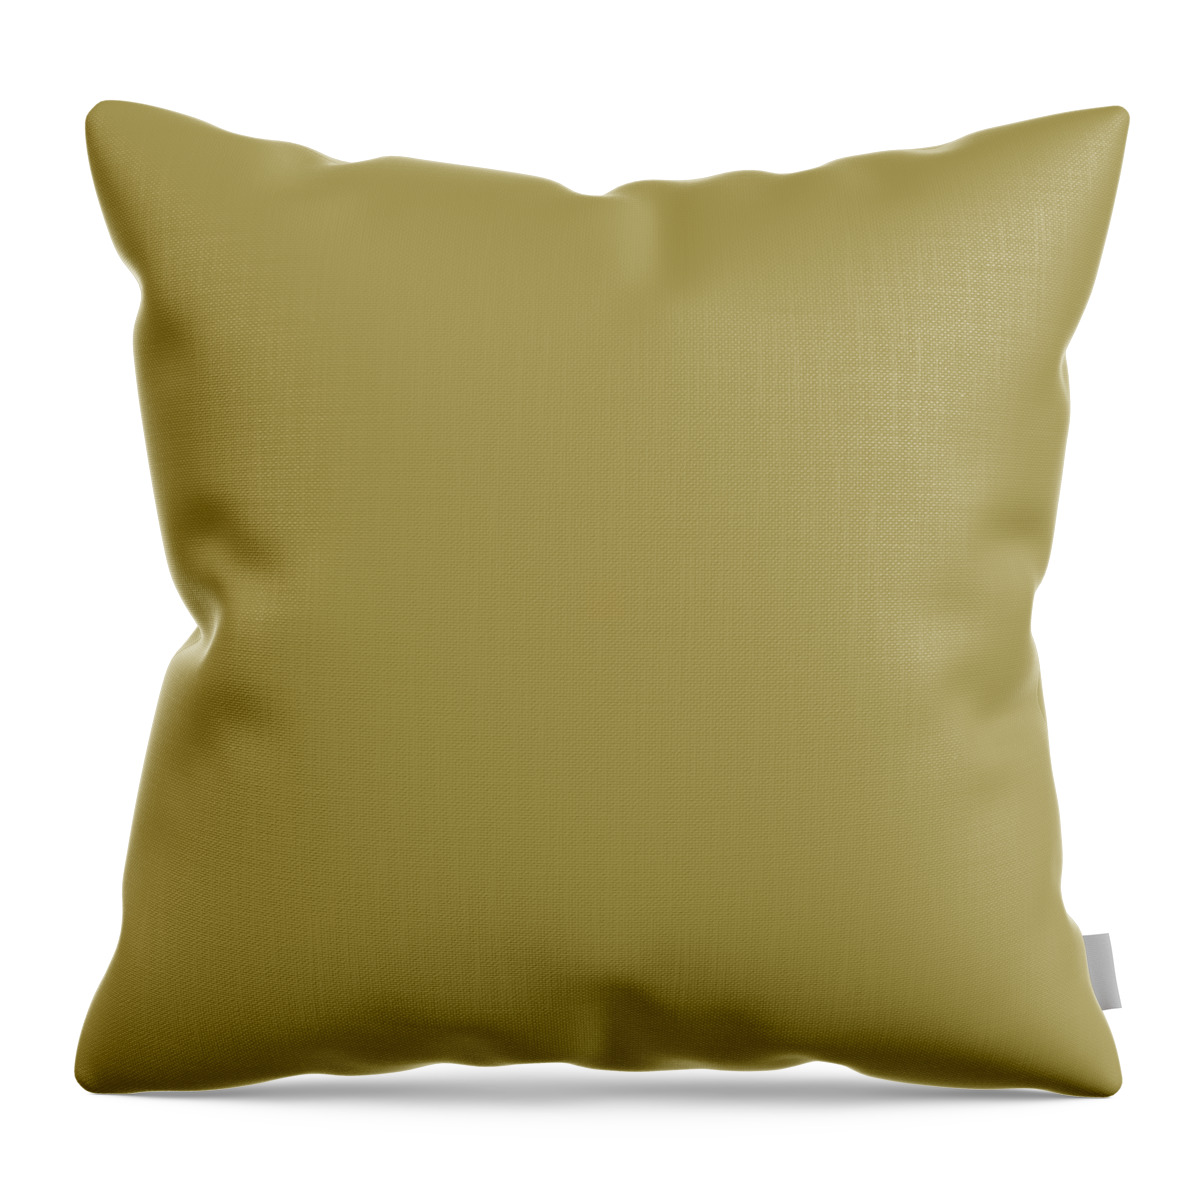 Gremlin Throw Pillow featuring the digital art Gremlin by TintoDesigns